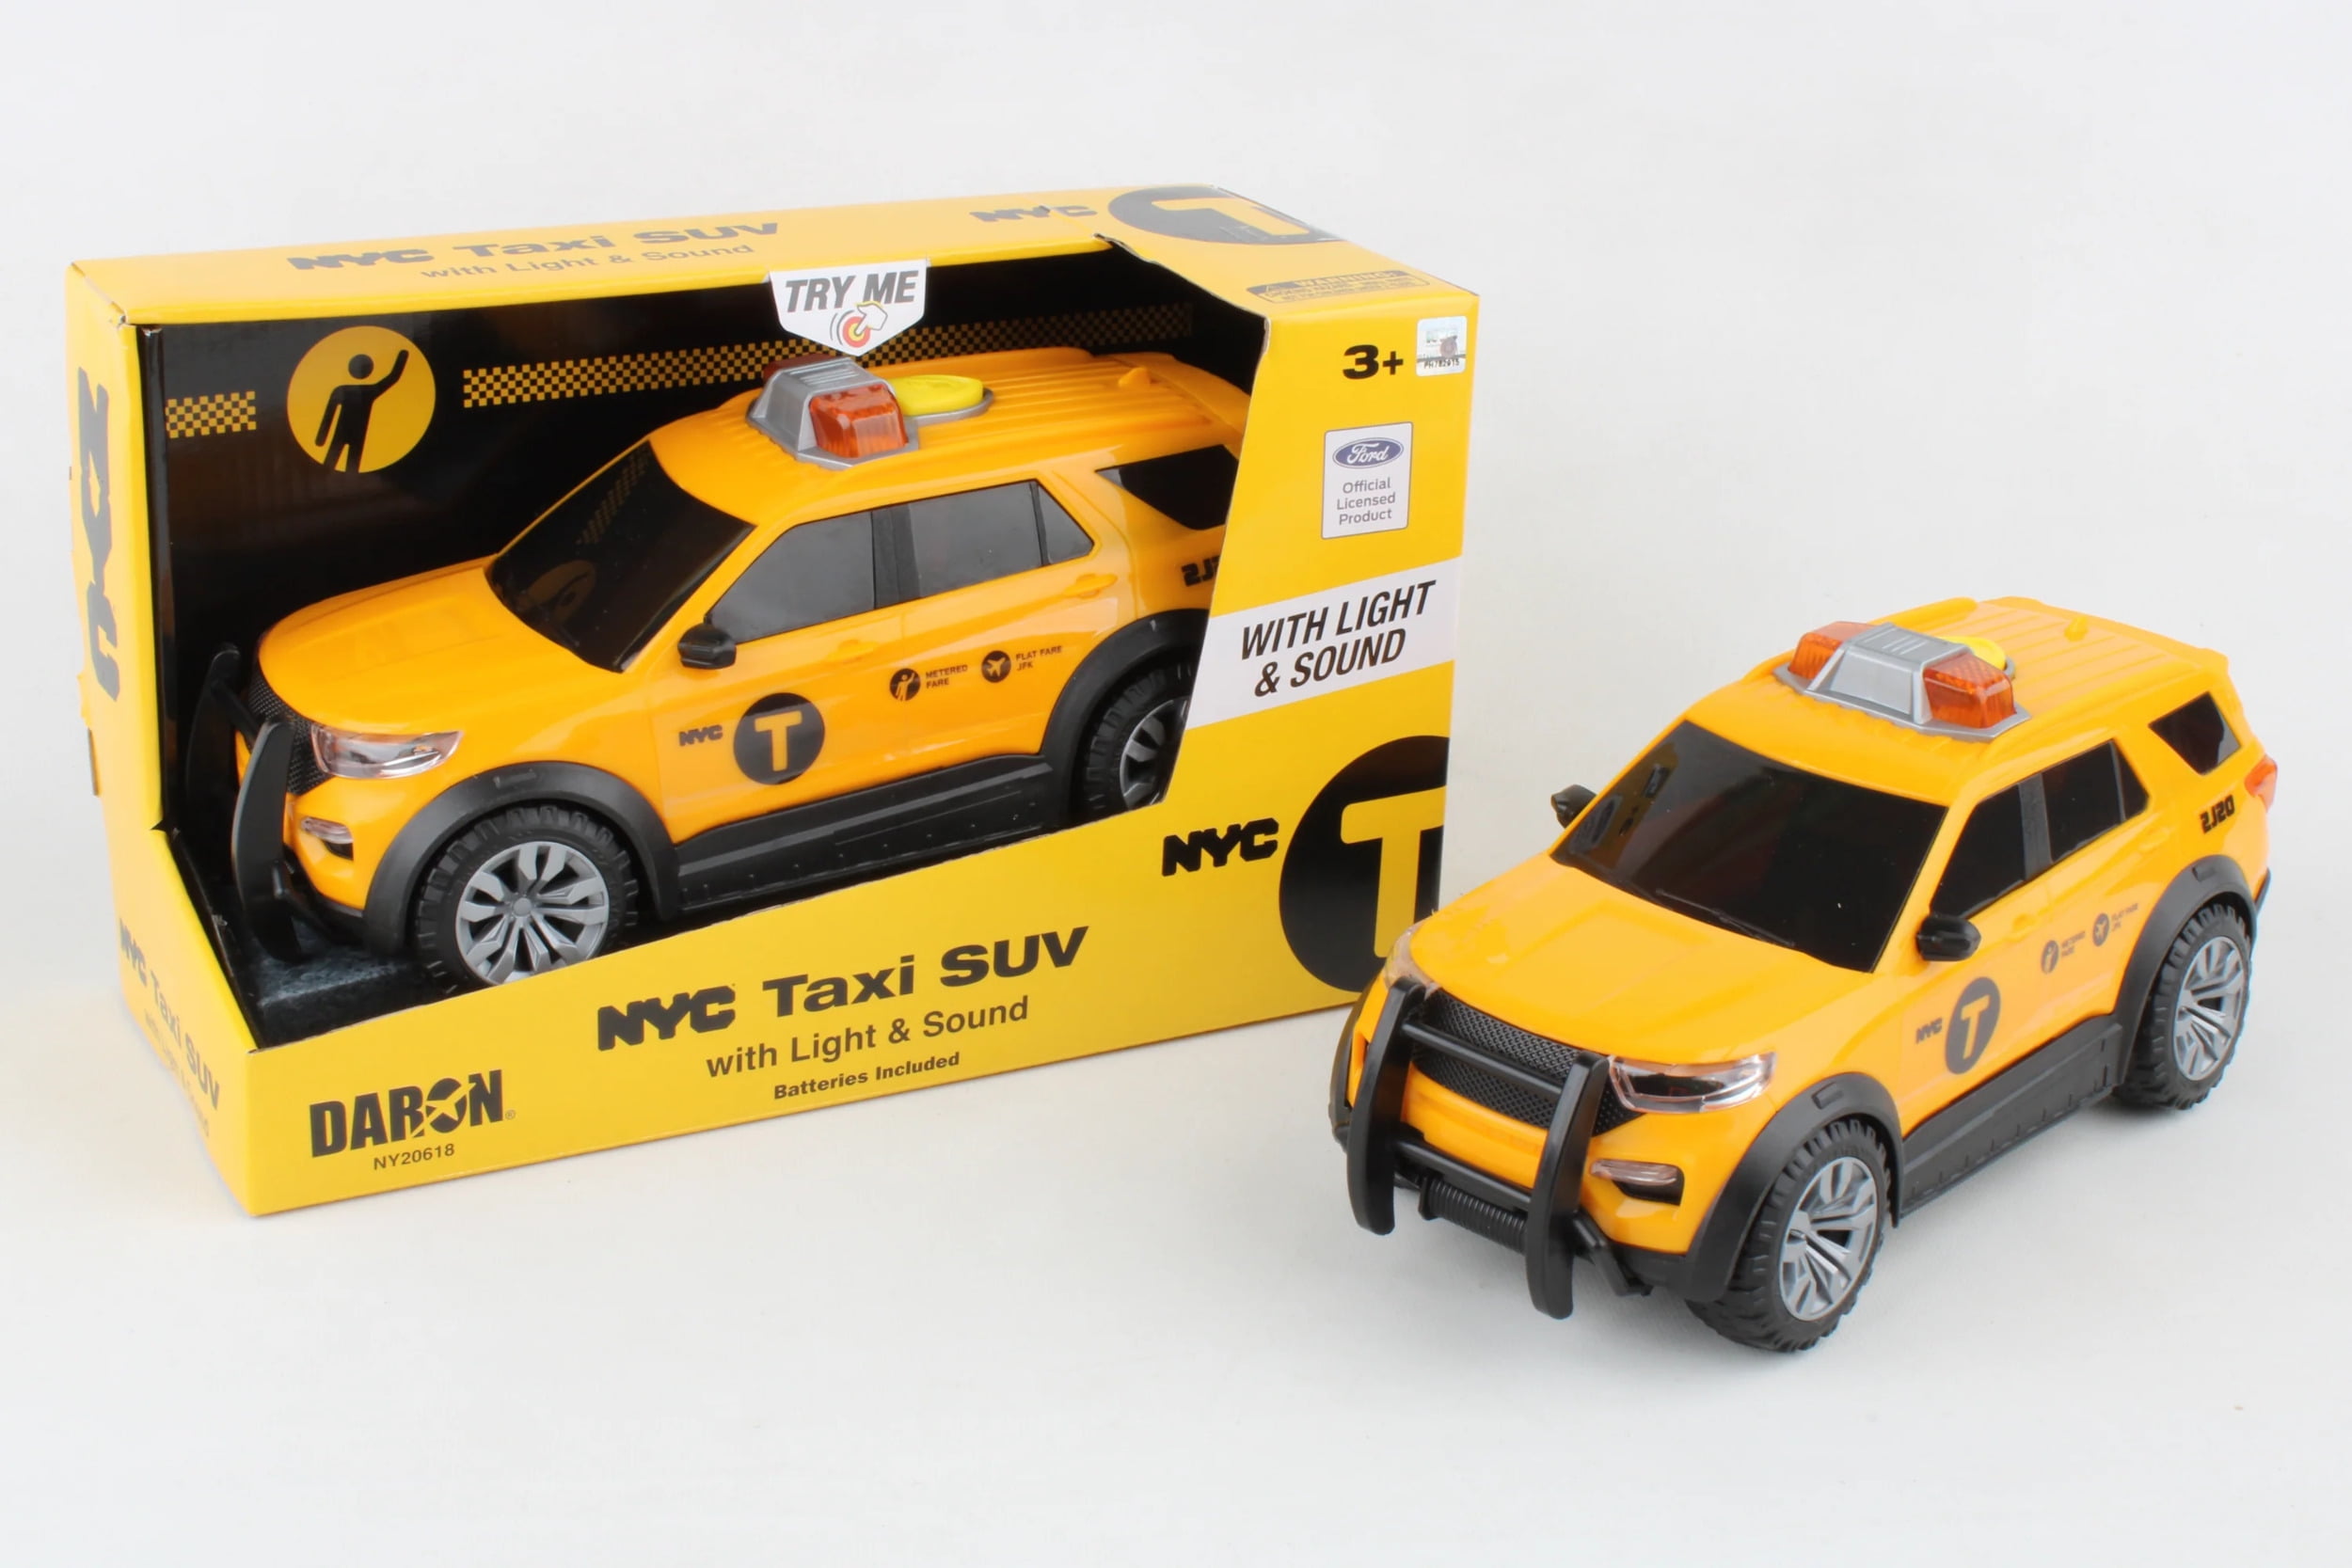 Picture of York City NY20618 Ford Suv Taxi with Light & Sound